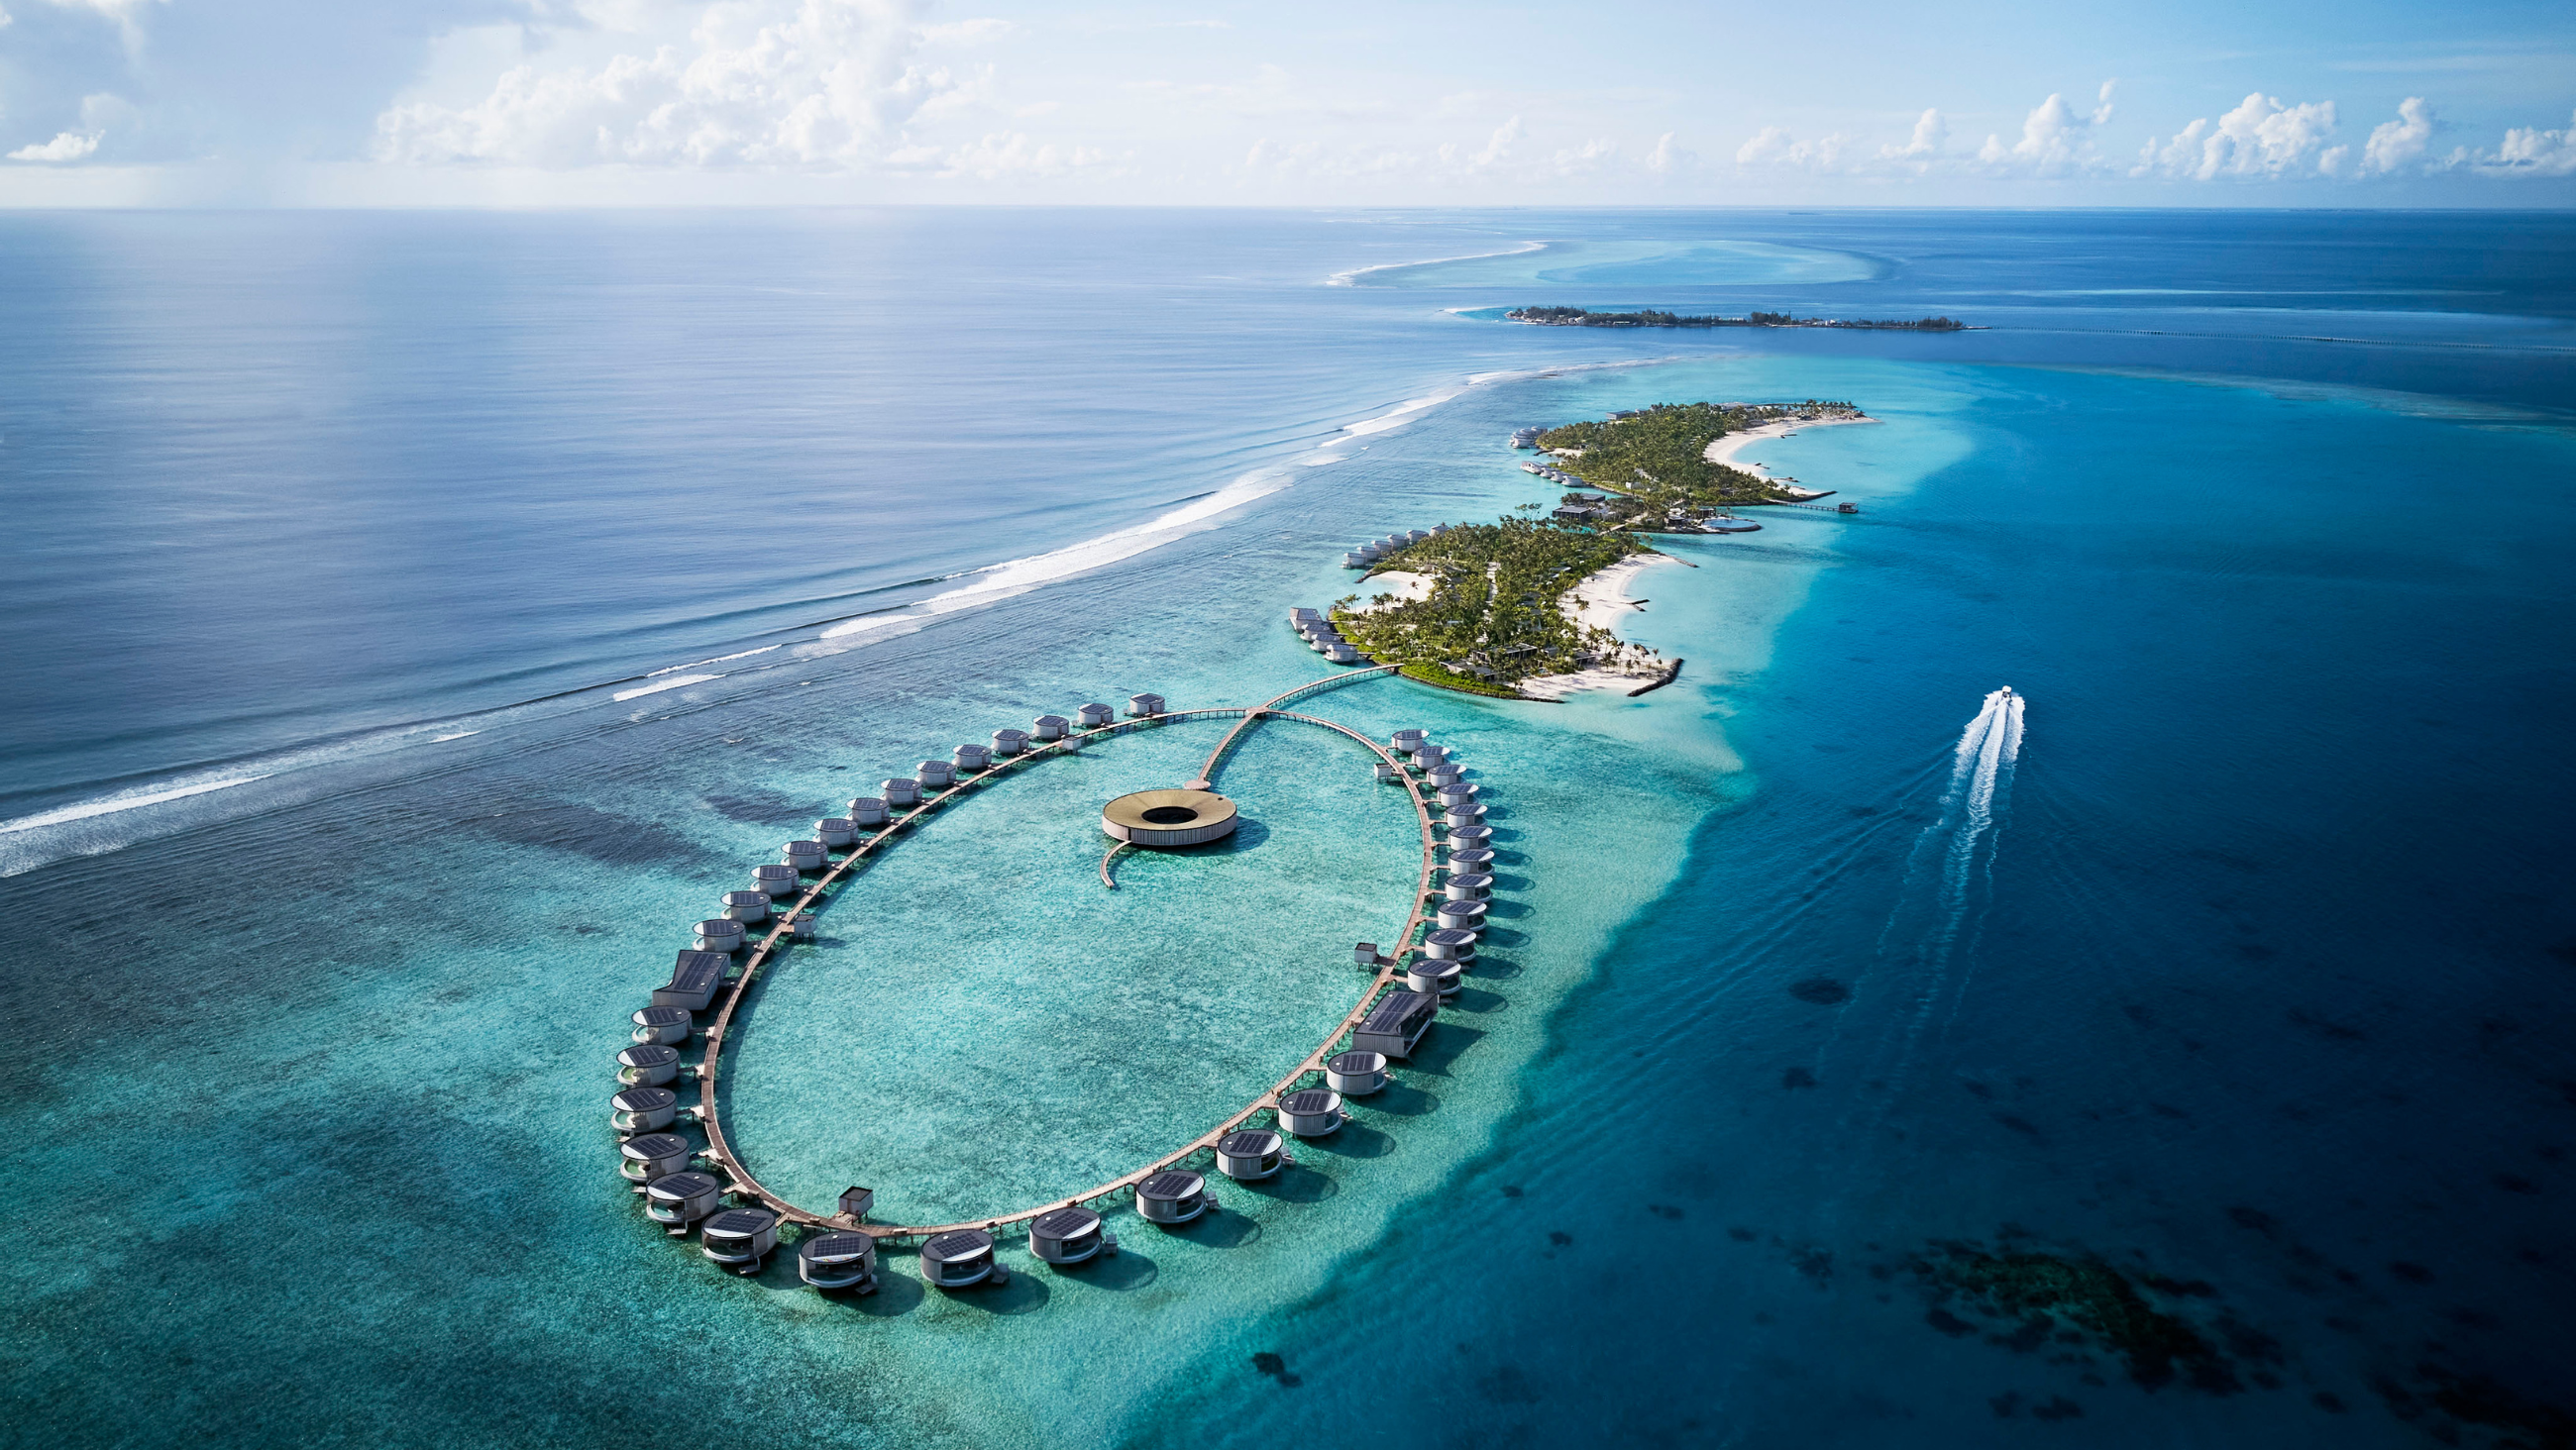 Spherical Elegance: A Closer Look at the Design and Architecture of The Ritz-Carlton Maldives